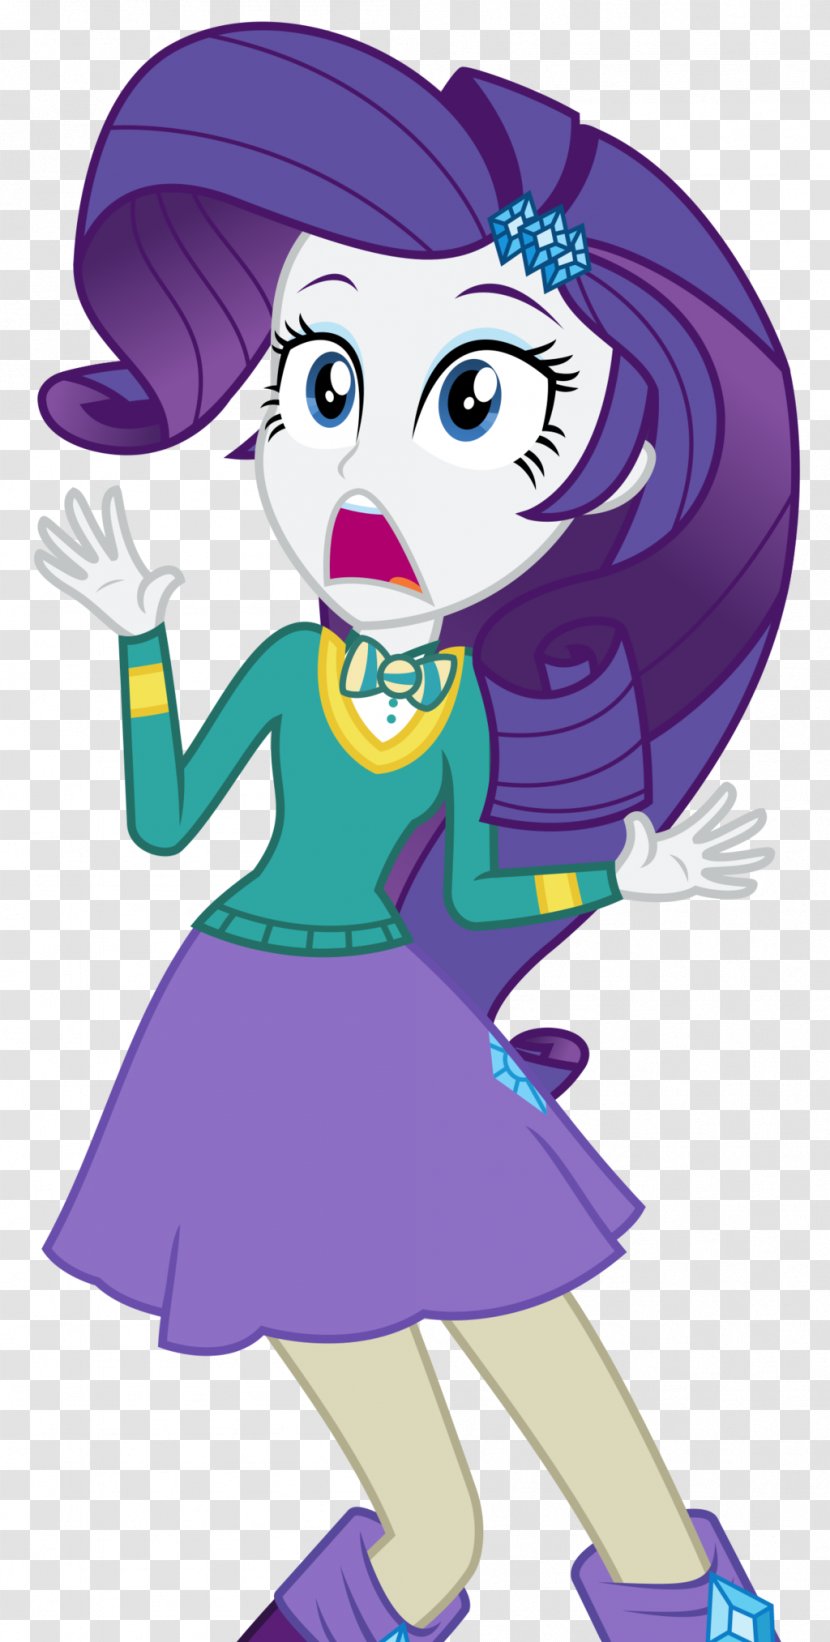 Rarity My Little Pony: Equestria Girls Twilight Sparkle - Silhouette Transparent PNG